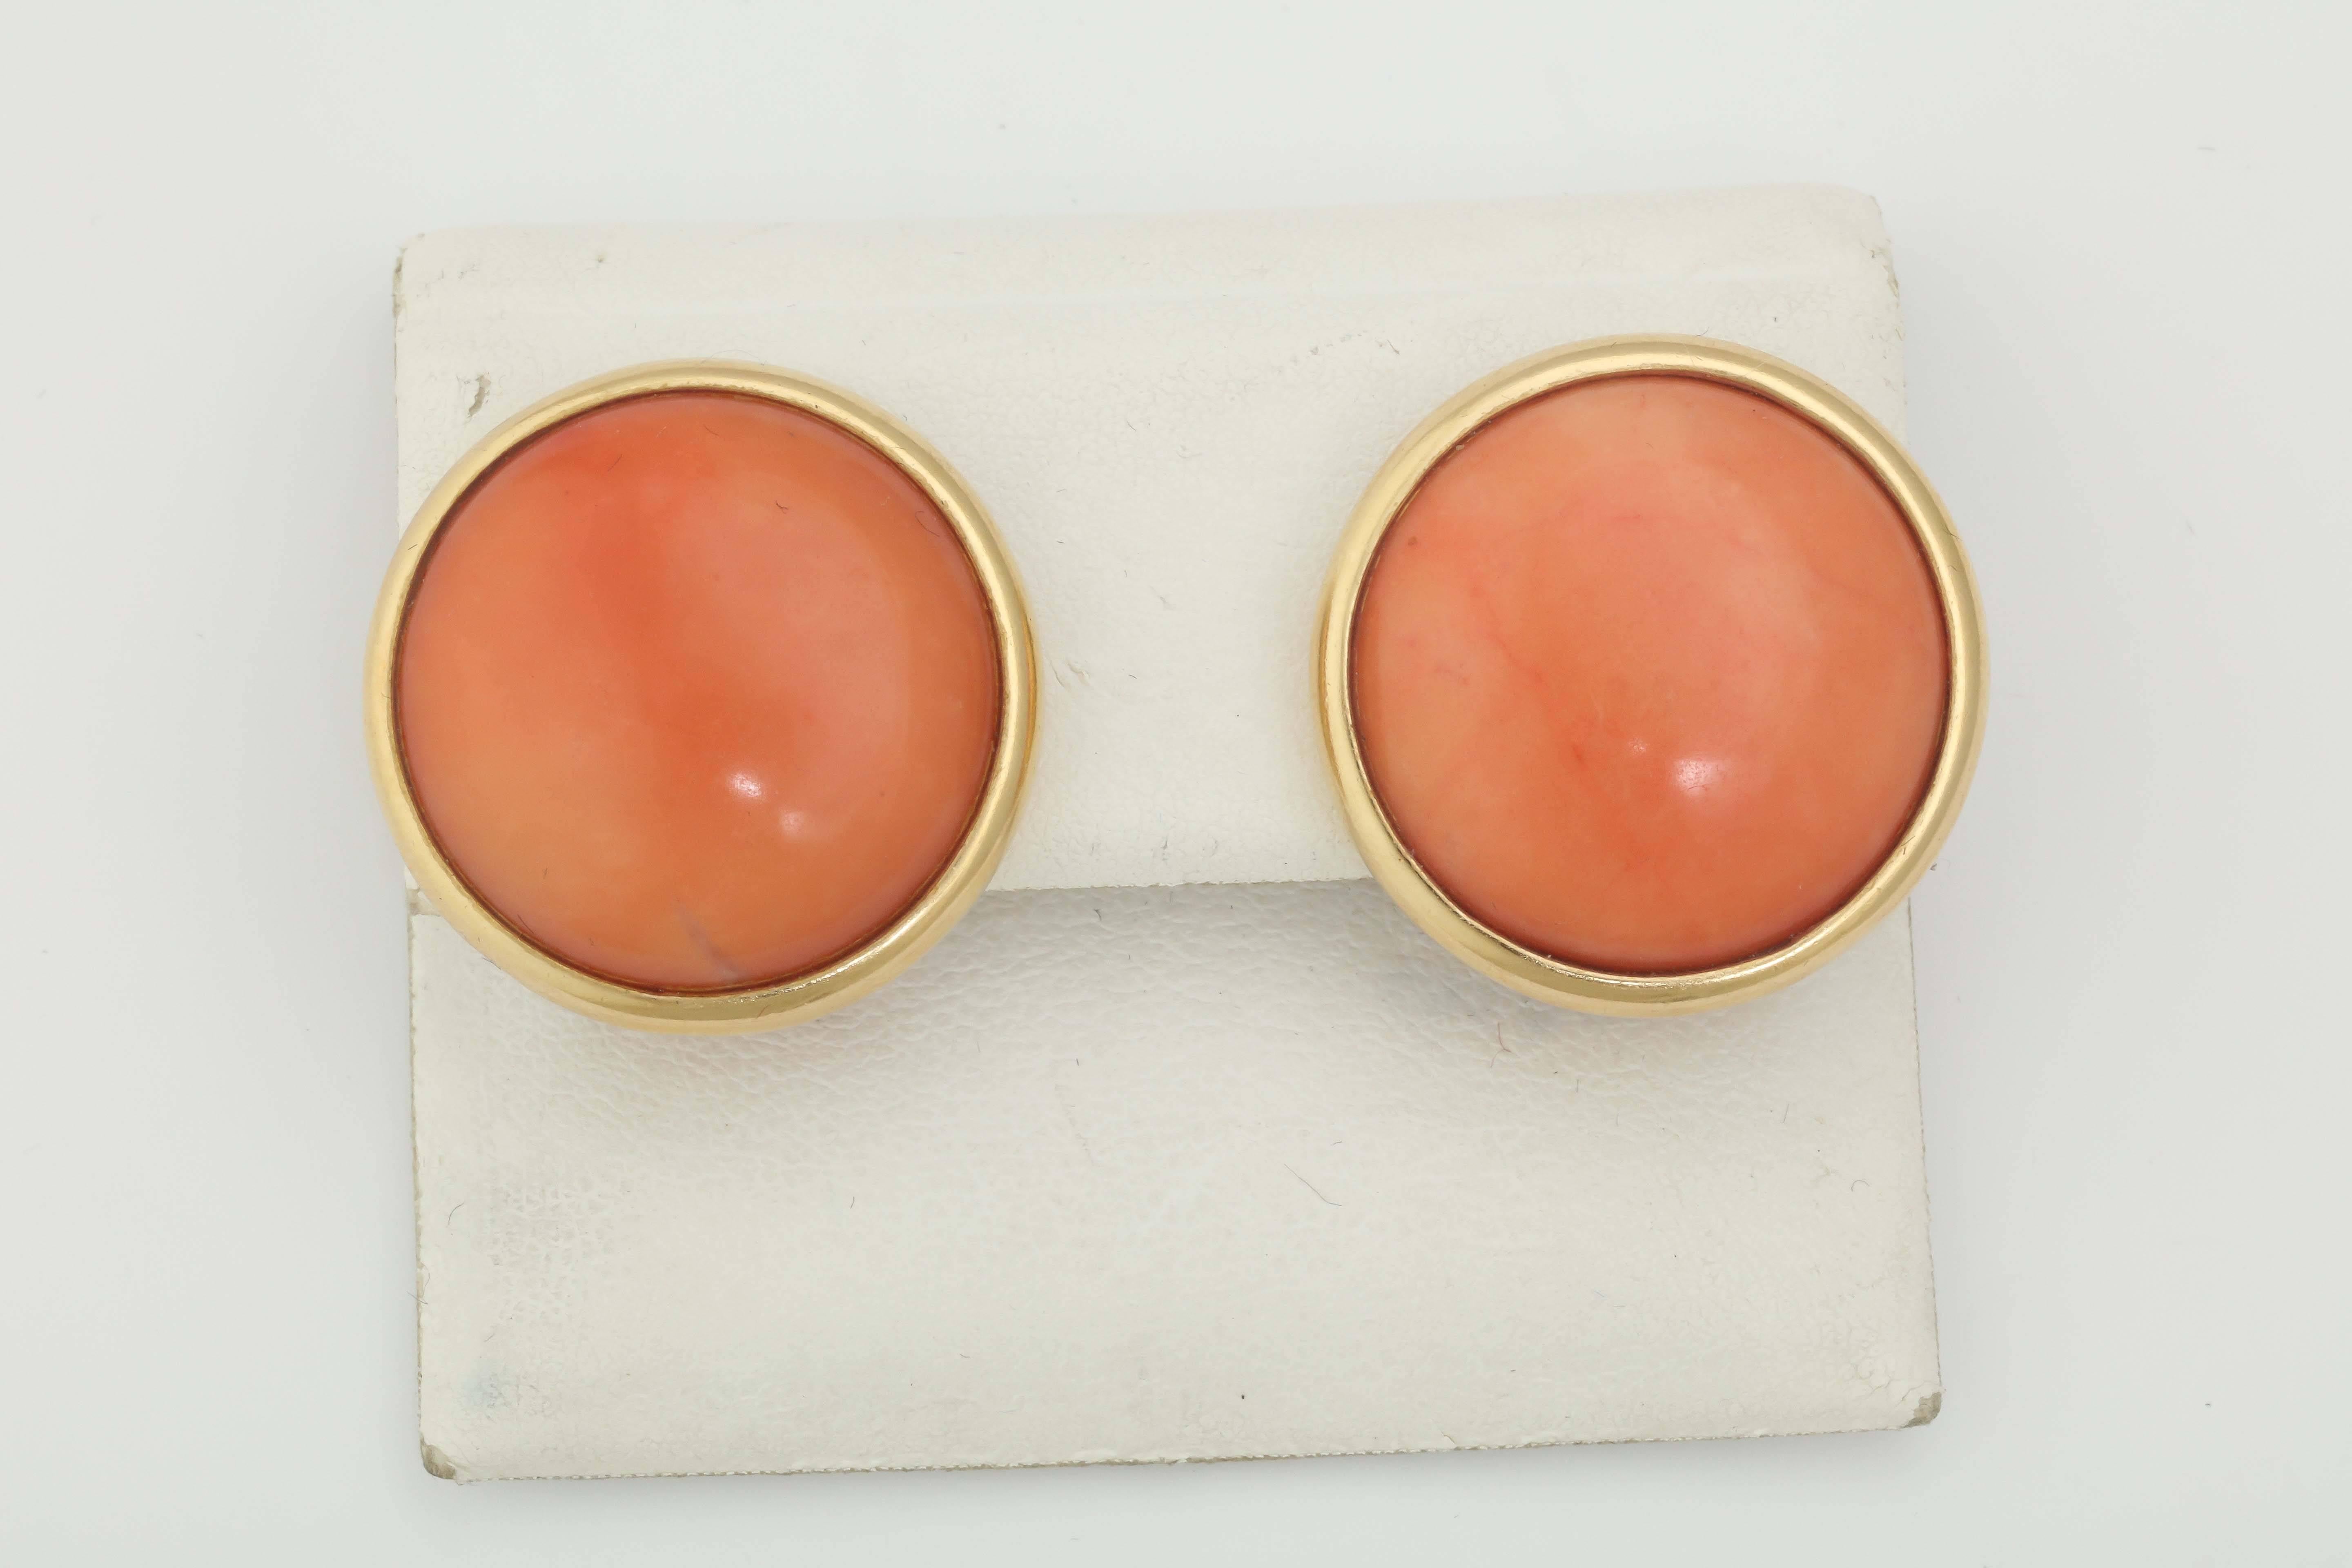 14kt Yellow Gold Clip-On Earrings Consisting Of [2] 25MM Bezel Set Angel Skin Coral Stones & Exhibiting Beautiful Floral Design Open Work Craftmanship In The Back Of The Earclips. NOTE: Posts May Be Added For Pierced Ears. Signed By Tambetti